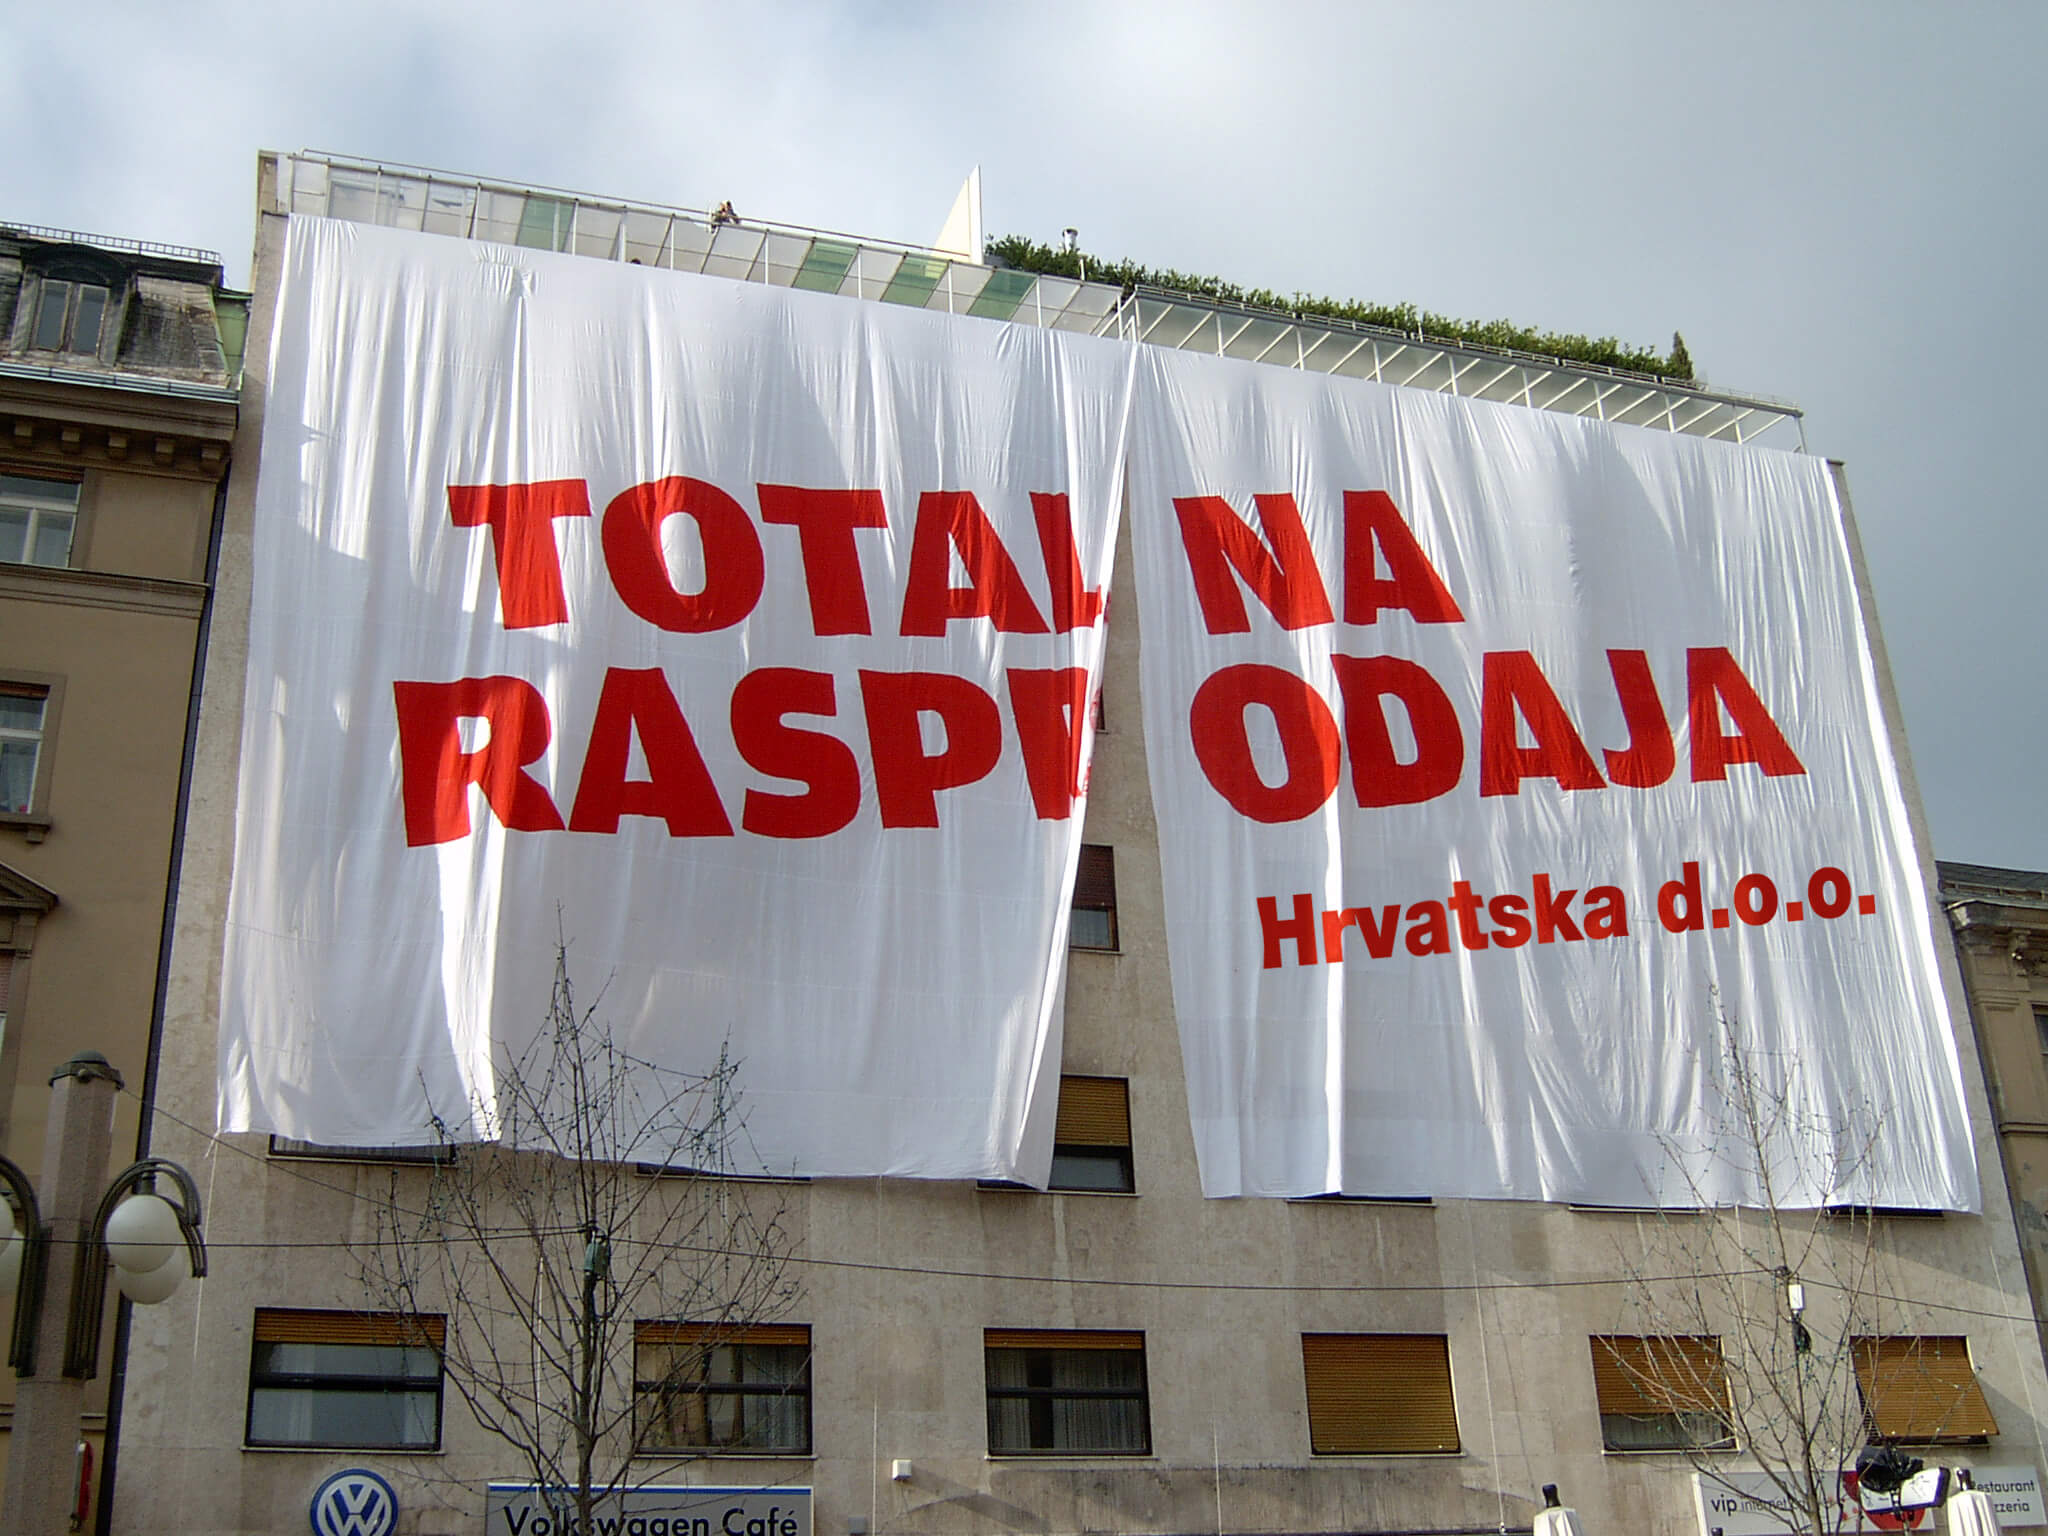 'Total sellout, Croatia, LTD.', a poster by Pravo na Grad released from the newly built shopping mall in Varšavska  - originally it was signed 'Zagreb, LTD.', photo by Pravo na Grad